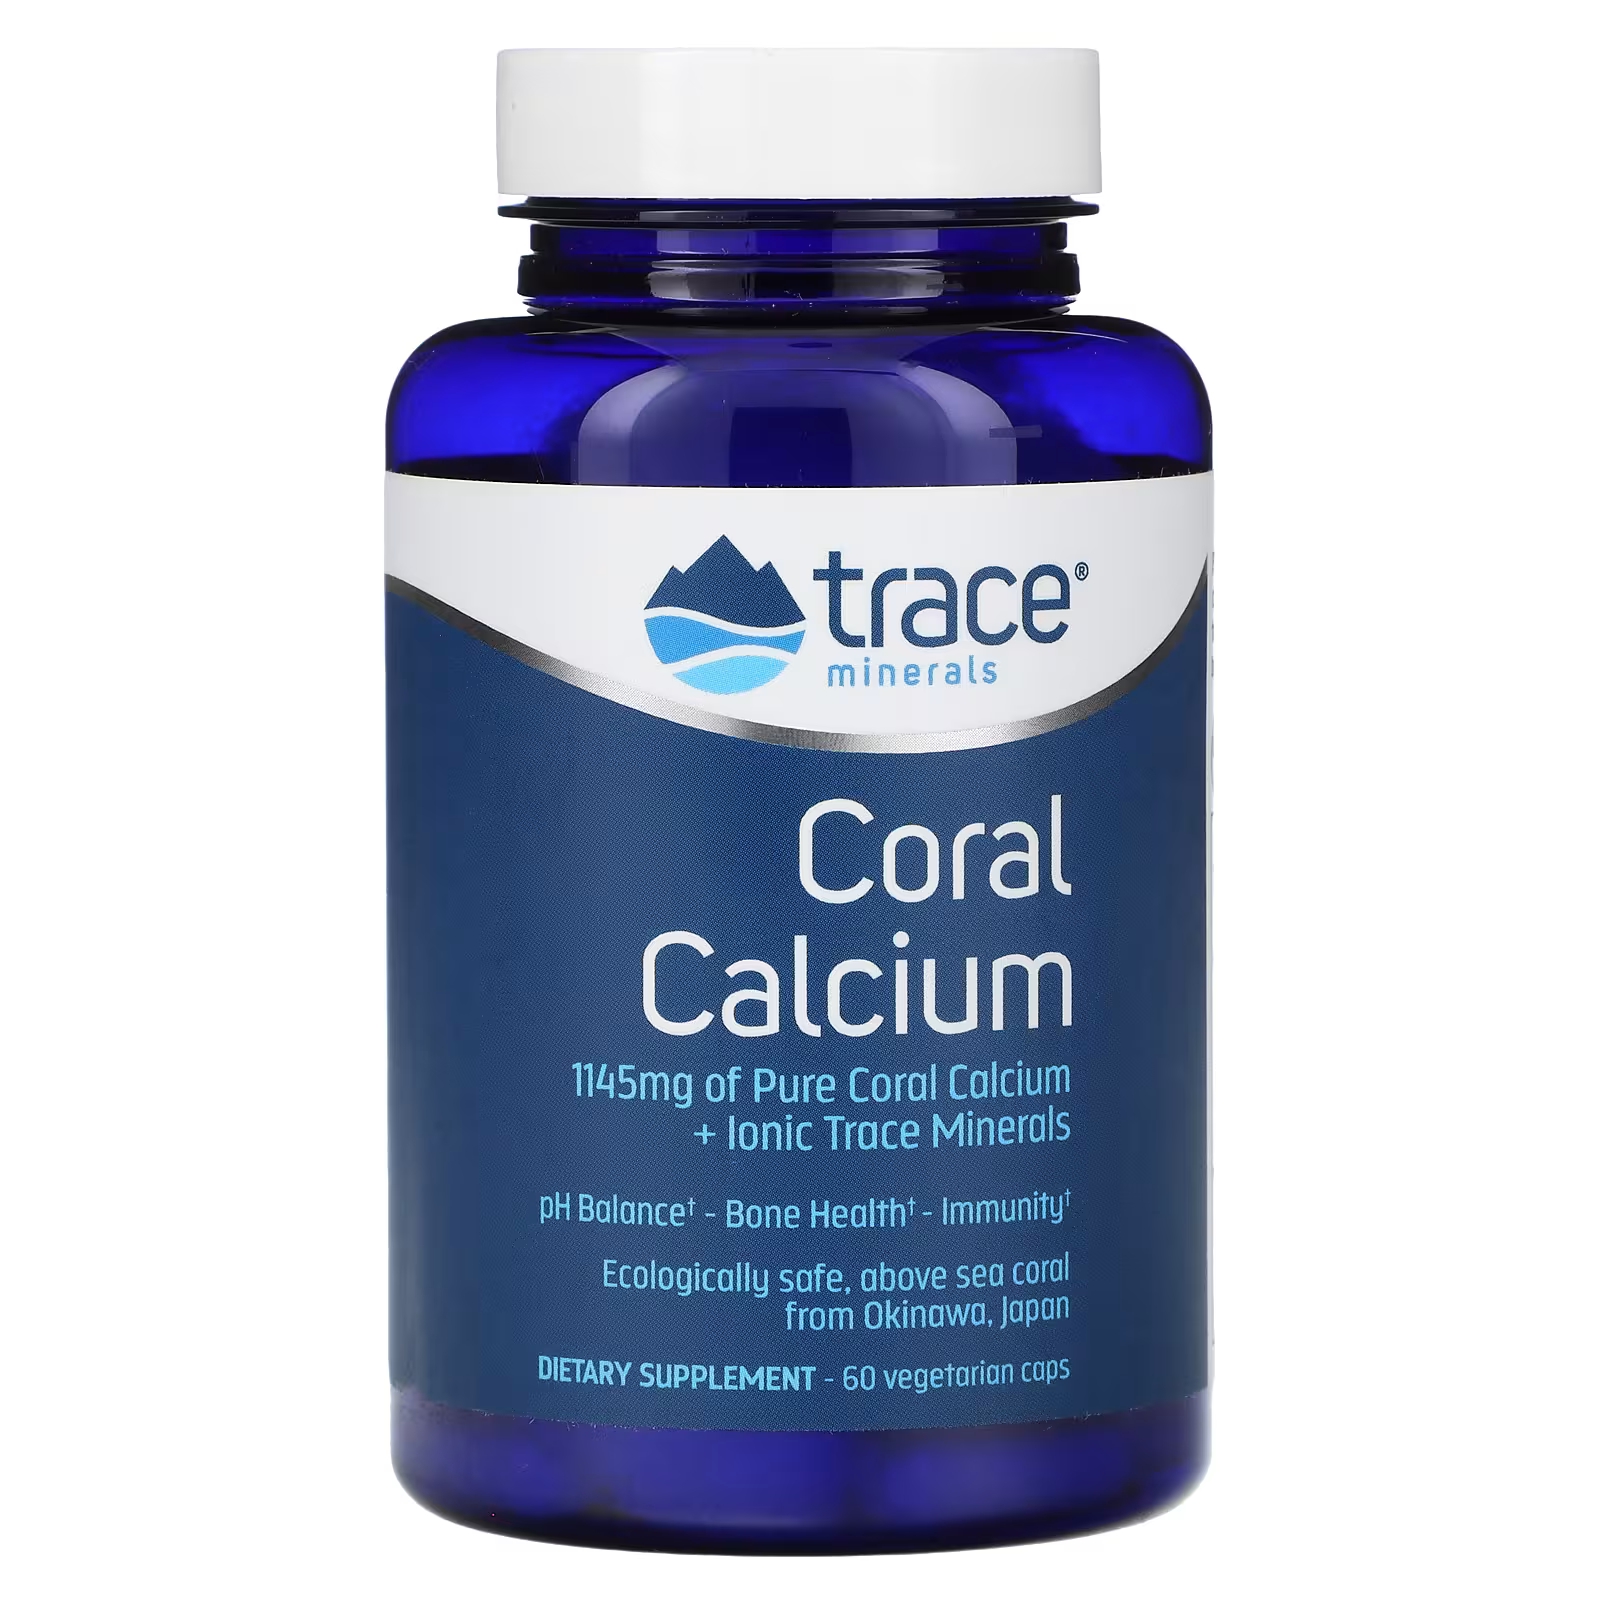 Trace Minerals Coral Calcium + Iconic Trace Minerals, 60 вегетарианских капсул Trace Minerals trace minerals ® tm ancestral цельные пищевые минералы 642 мг 180 капсул